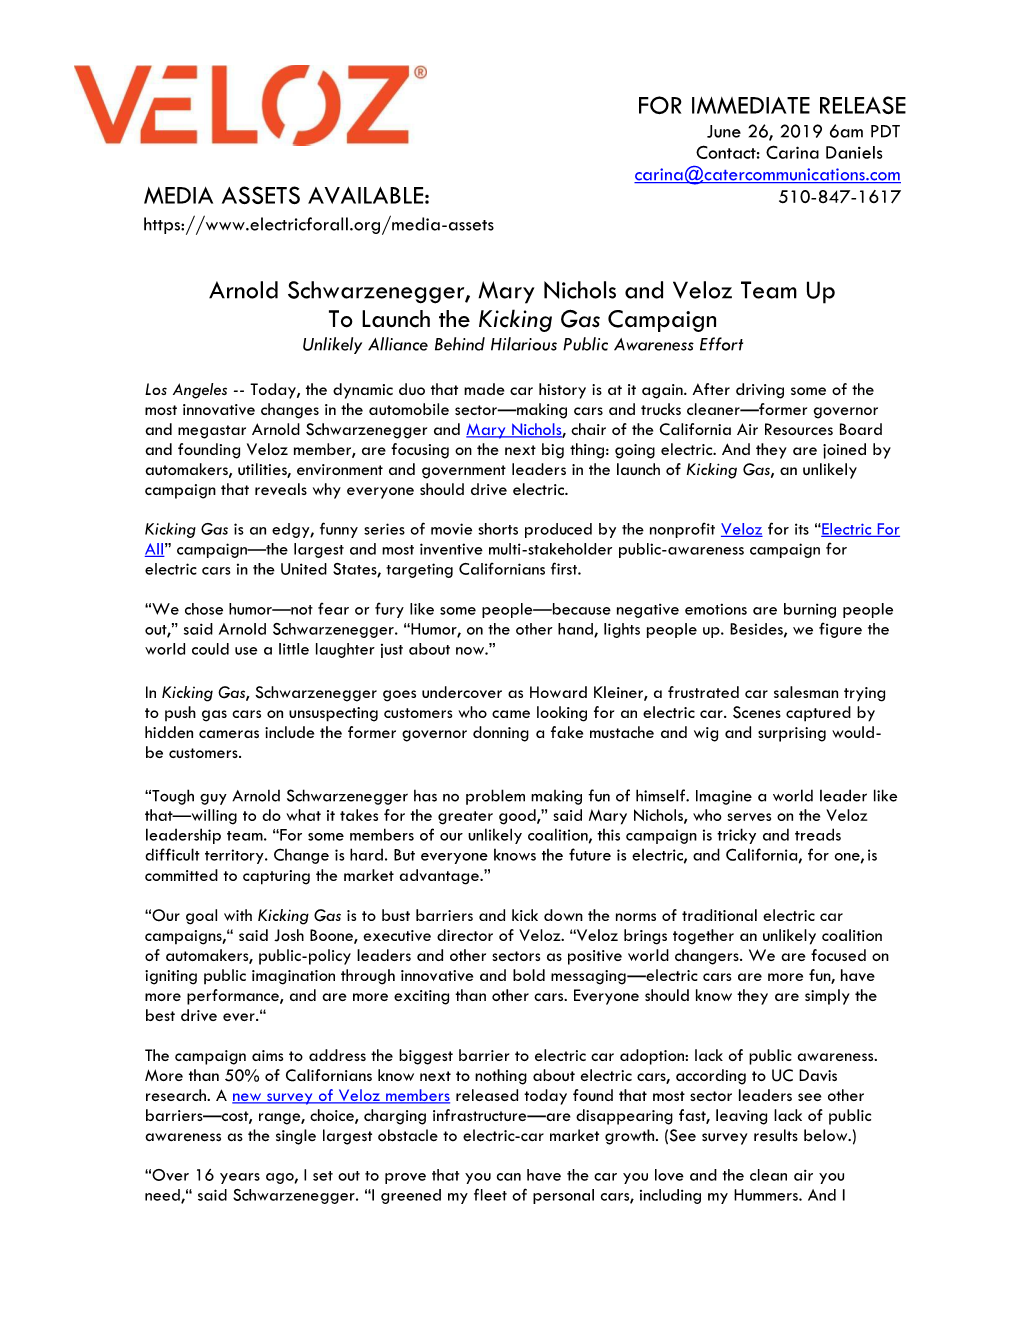 MEDIA ASSETS AVAILABLE: for IMMEDIATE RELEASE Arnold